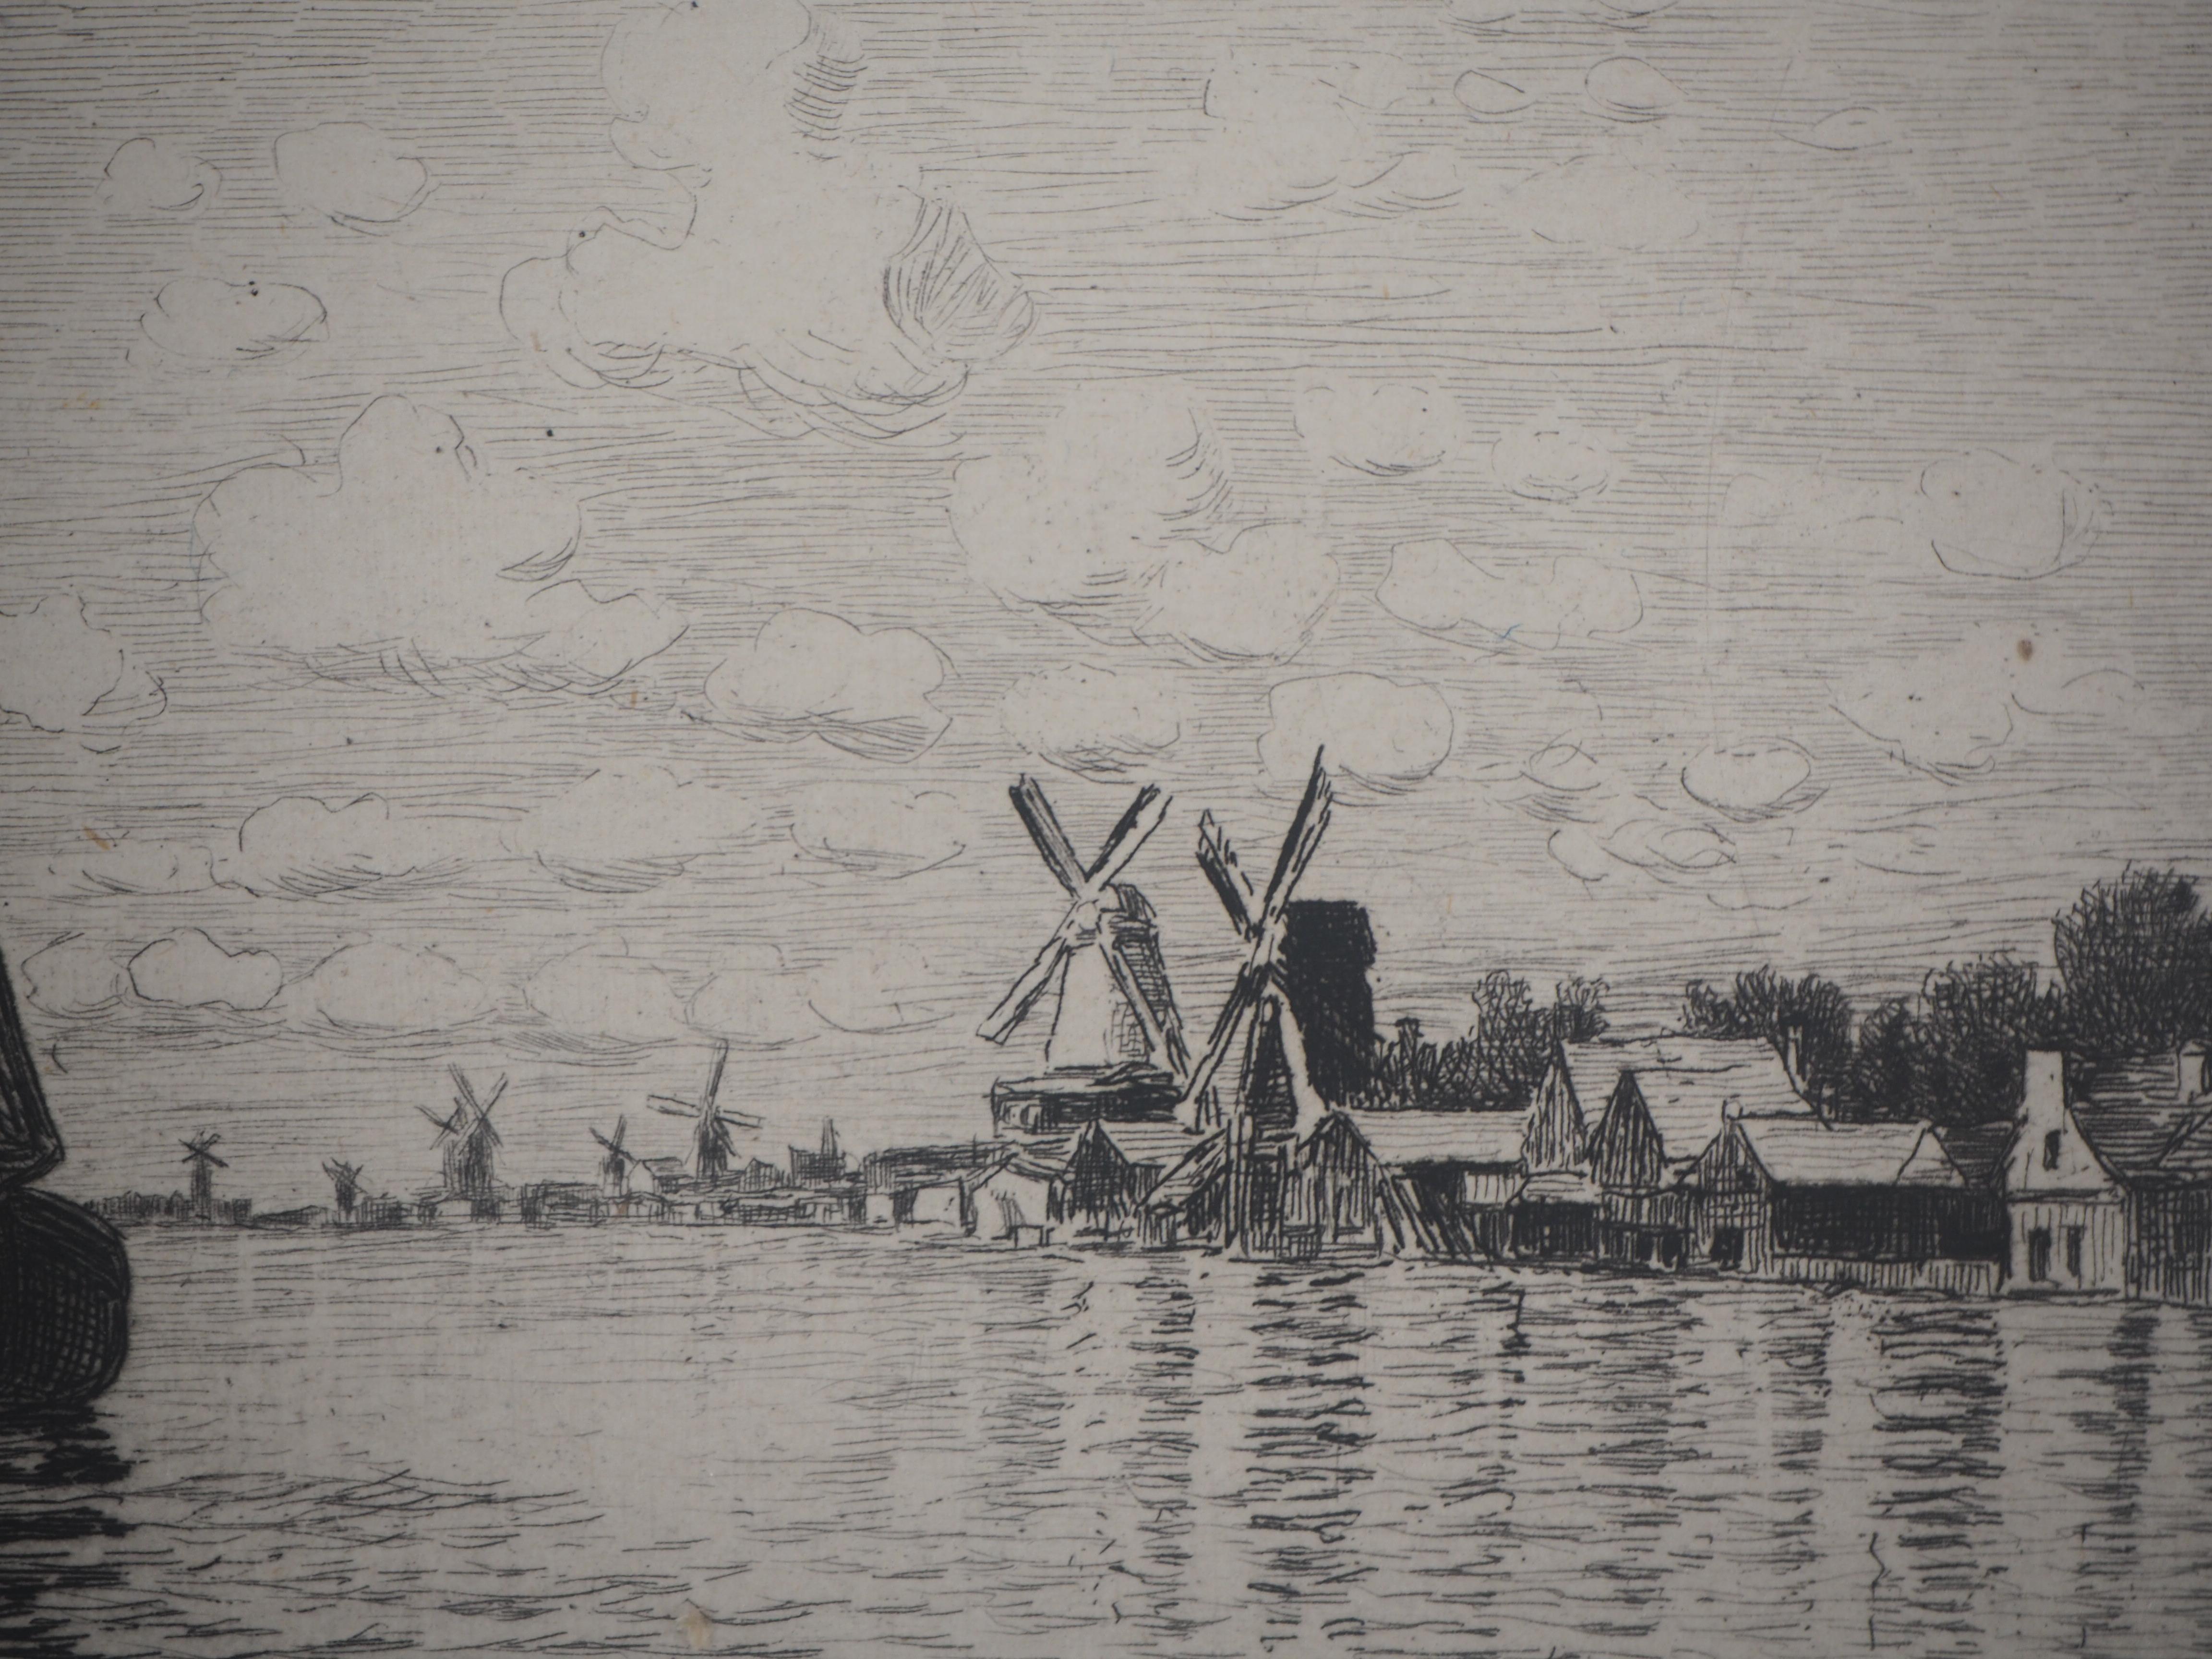 Windmills in Holland - Original etching - Ed. Durand Ruel, 1873 - Gray Landscape Print by Claude Monet